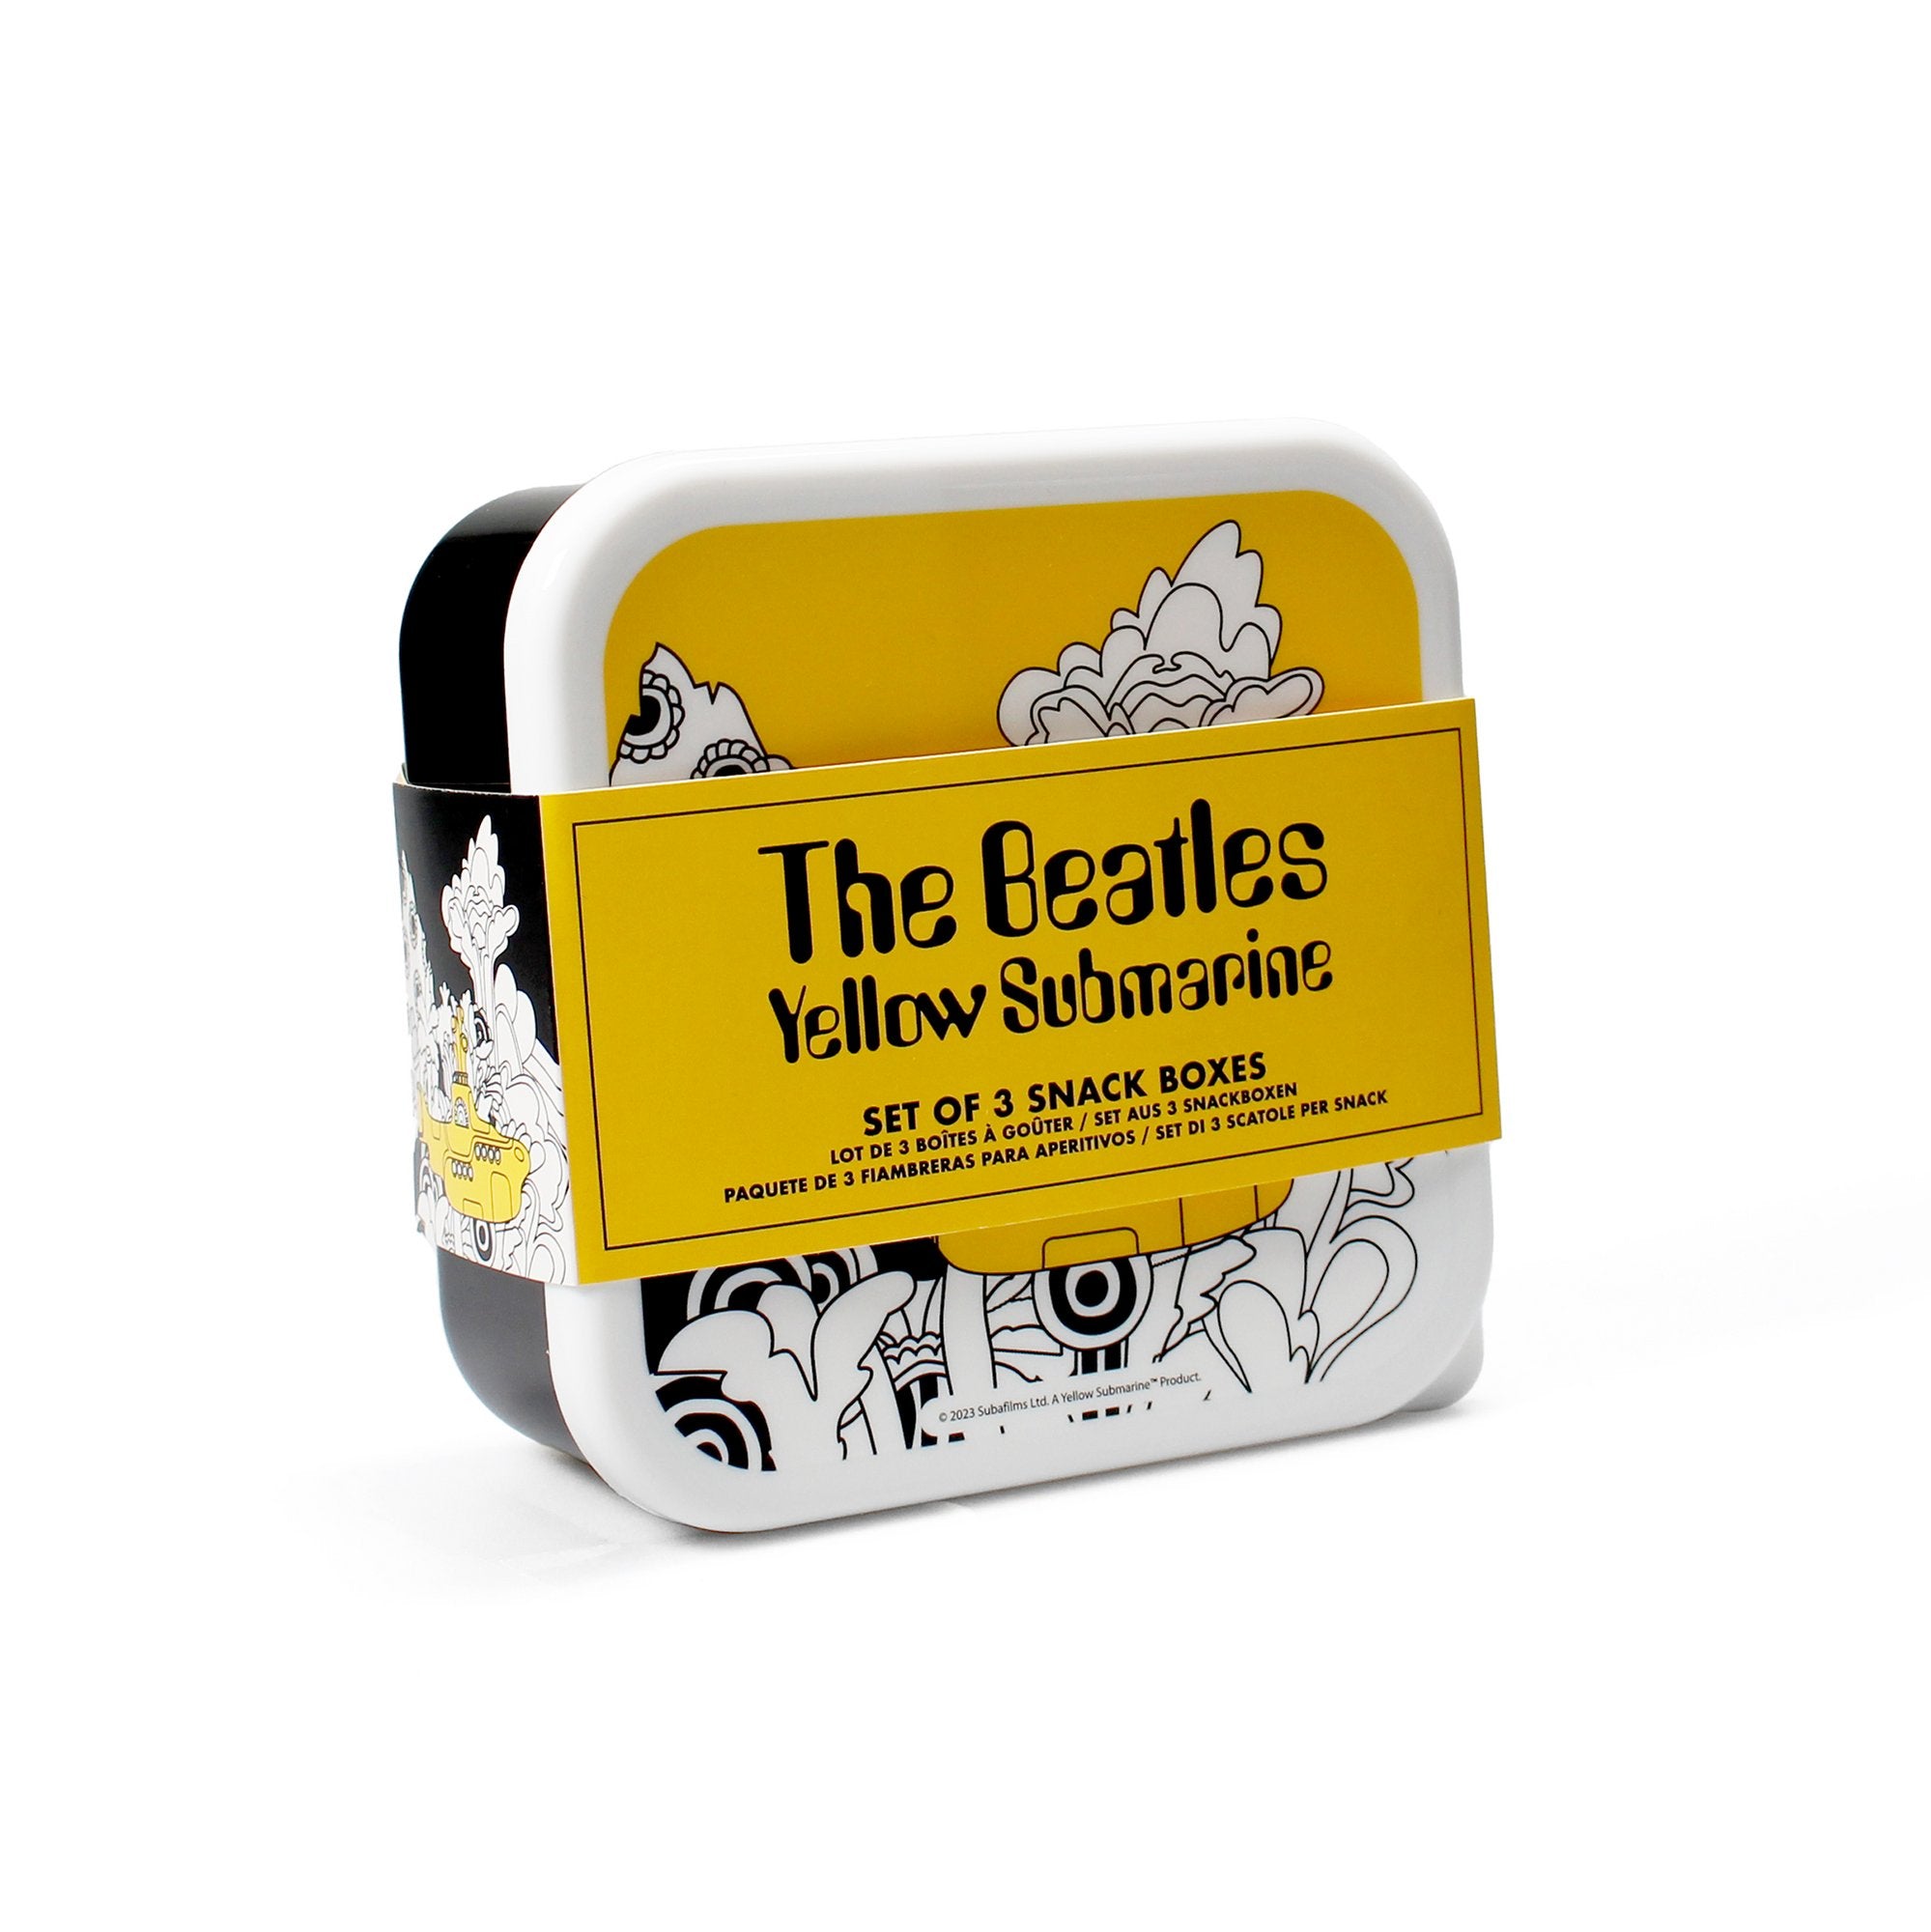 Snack Boxes Set of 3 - The Beatles (Yellow Submarine)